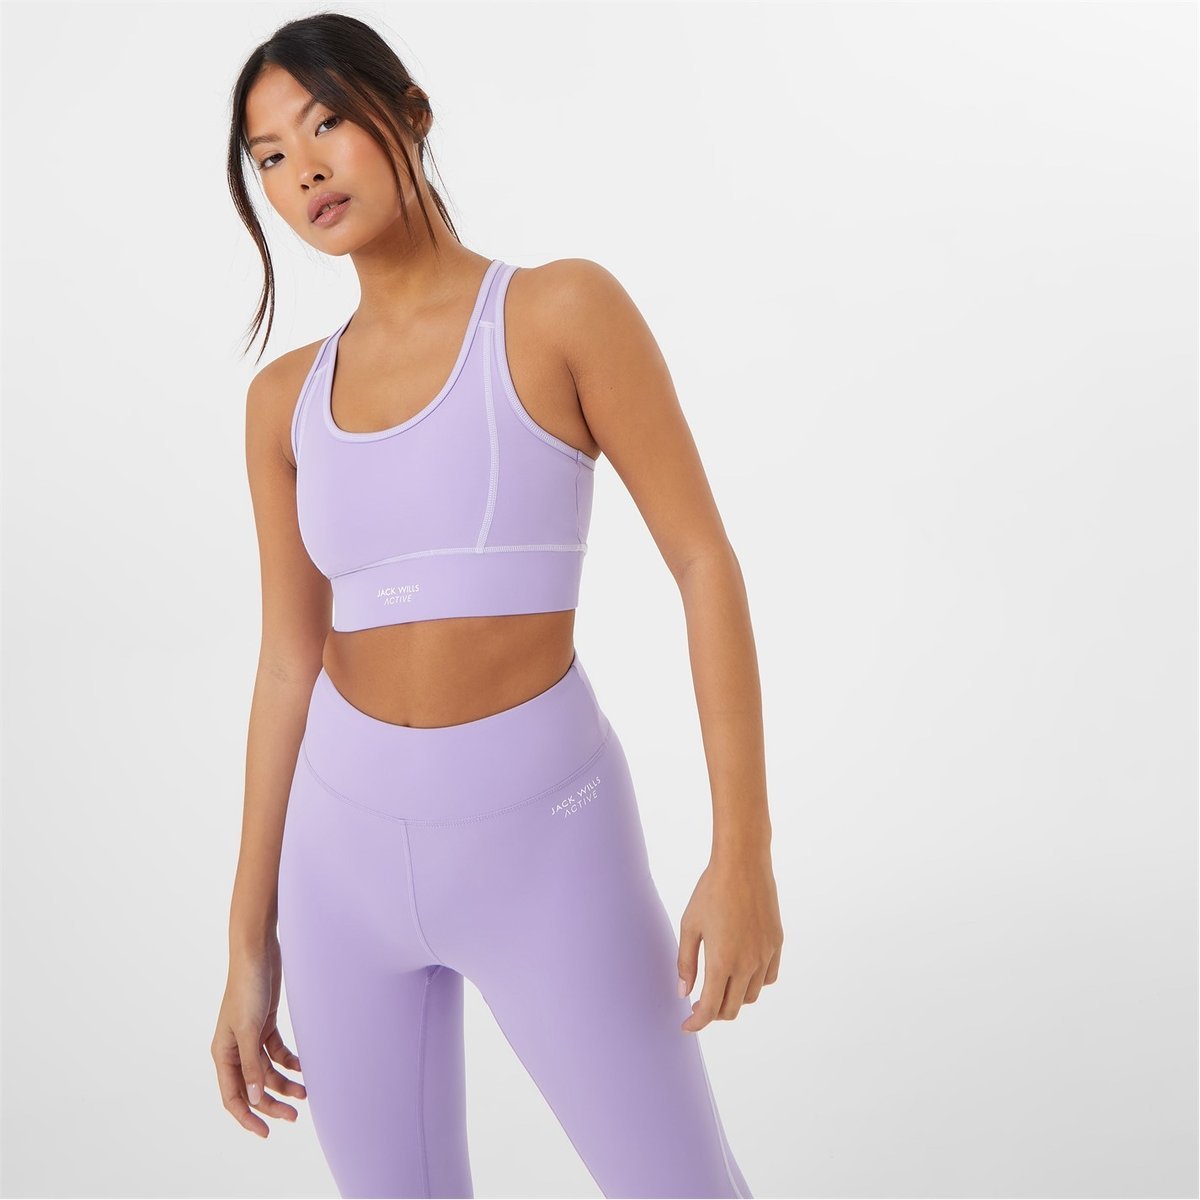 I Saw It First, Seamless Contrast Active Sports Bra